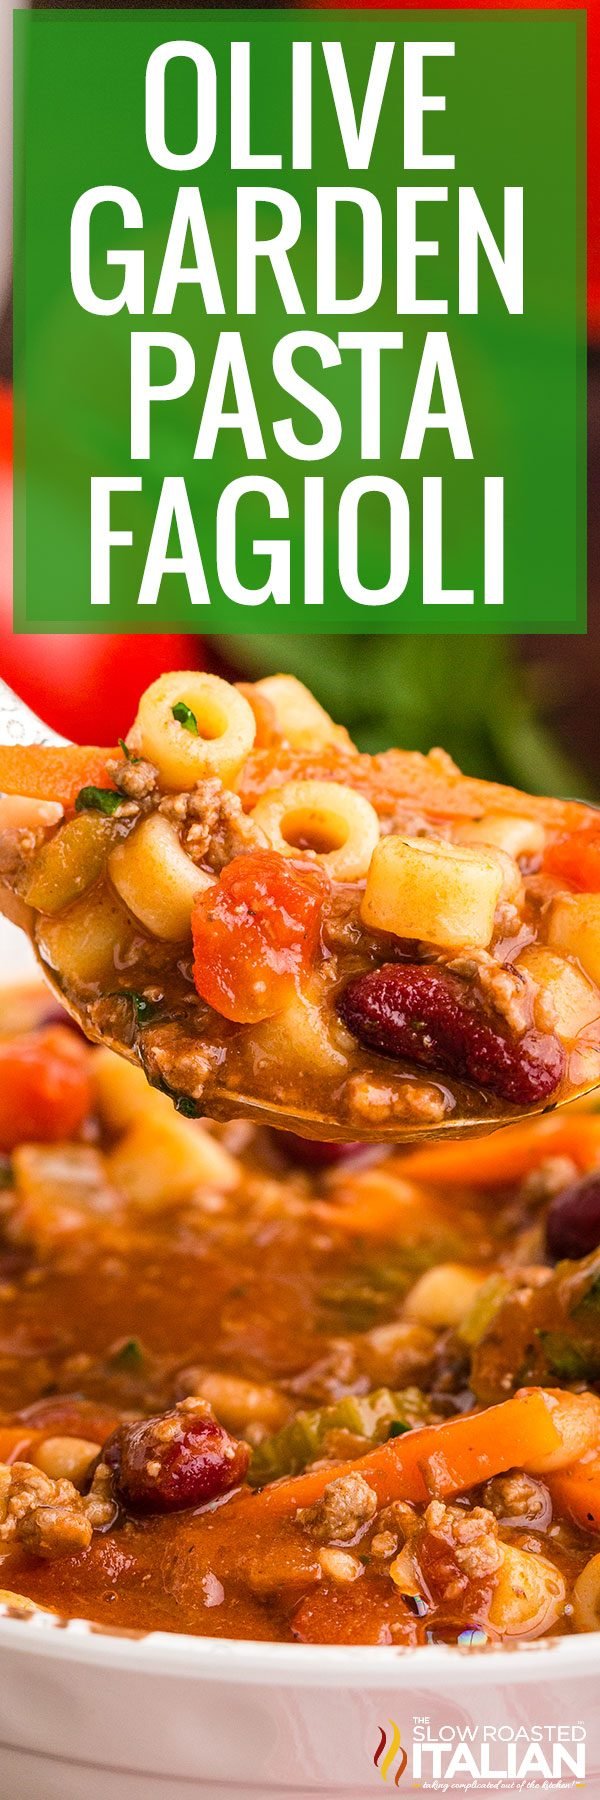 titled image (and shown): olive garden pasta fagioli